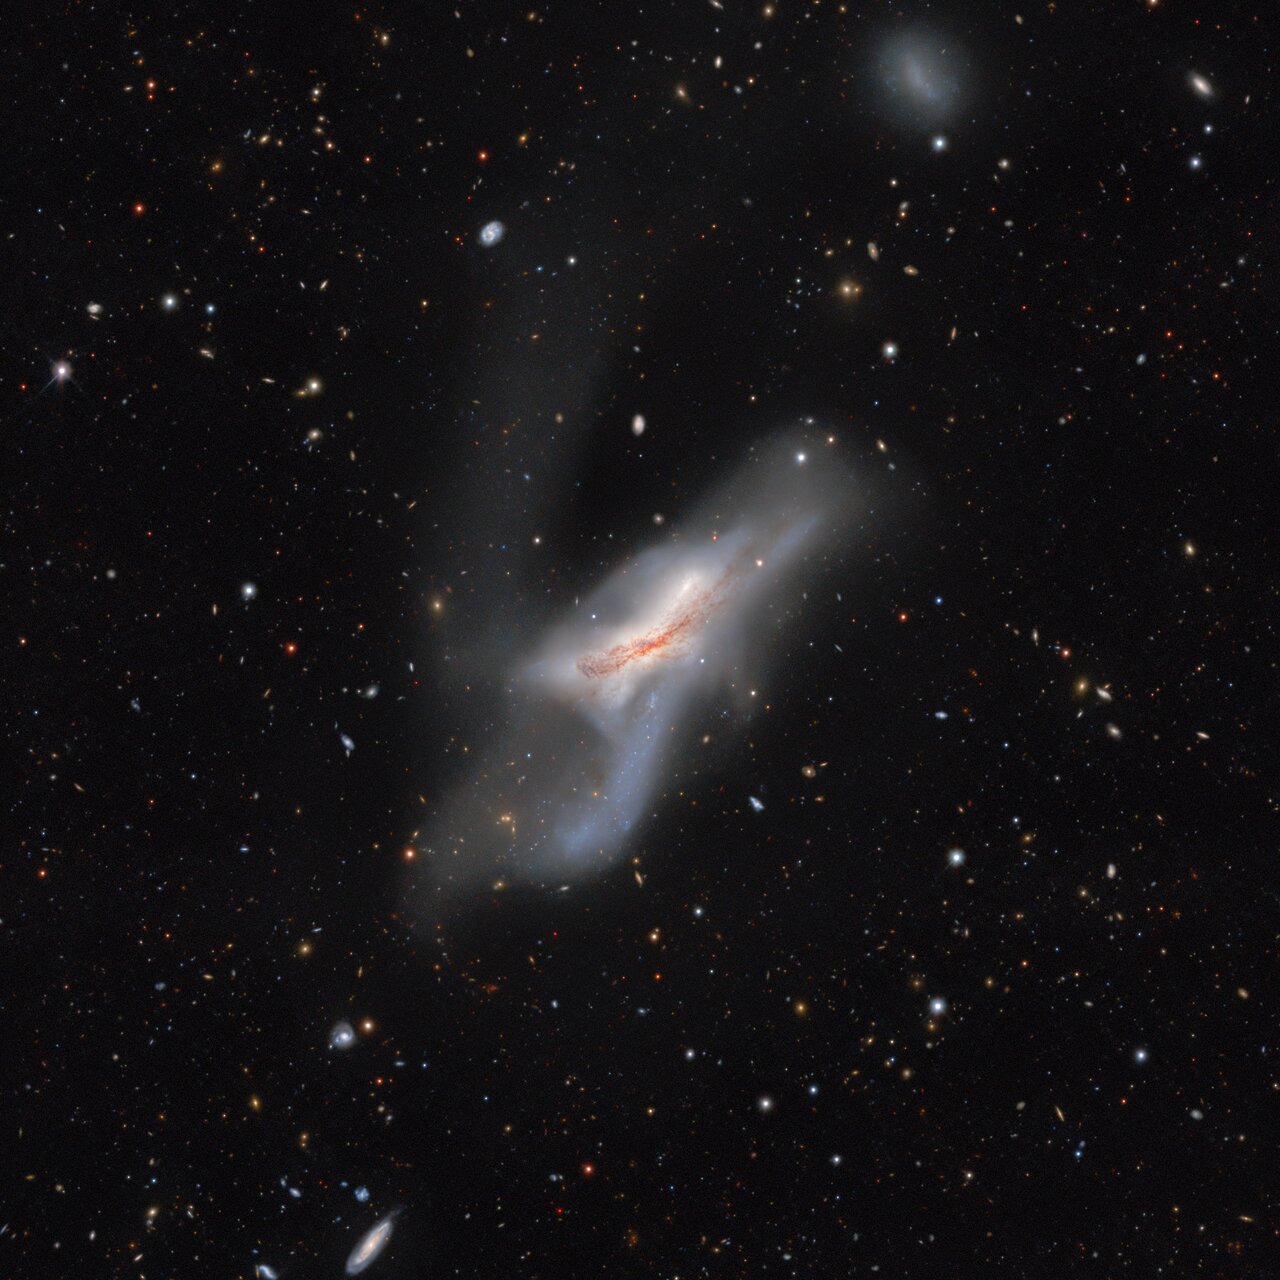 Collision of two galaxies (NGC 520) that occurred more than 300 million years ago.